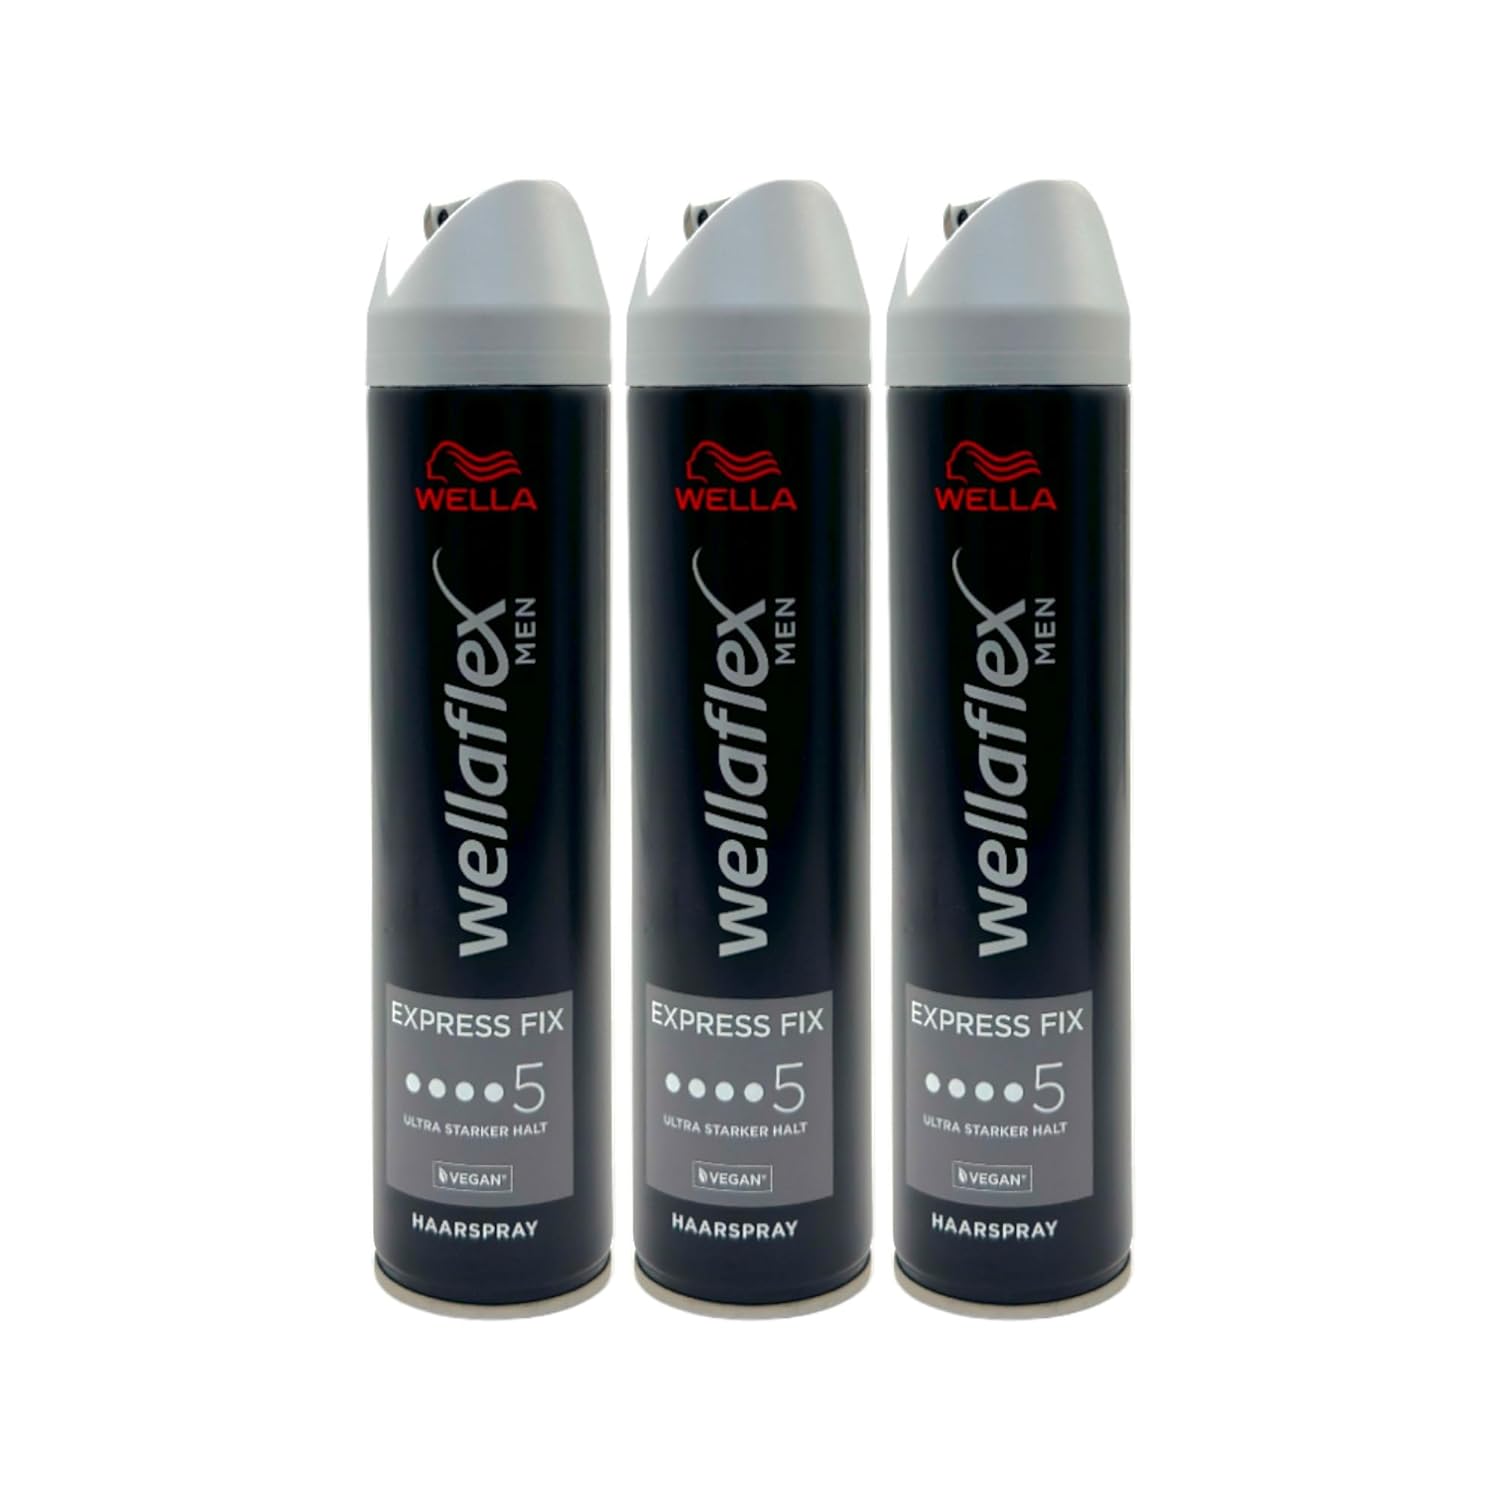 Wella Wellaflex Hair Spray Men Express Fix Ultra Strong Hold 250 ml | Hair Spray for Ultra Strong Hold | Maintains Style Up to 48h (Pack of 3)